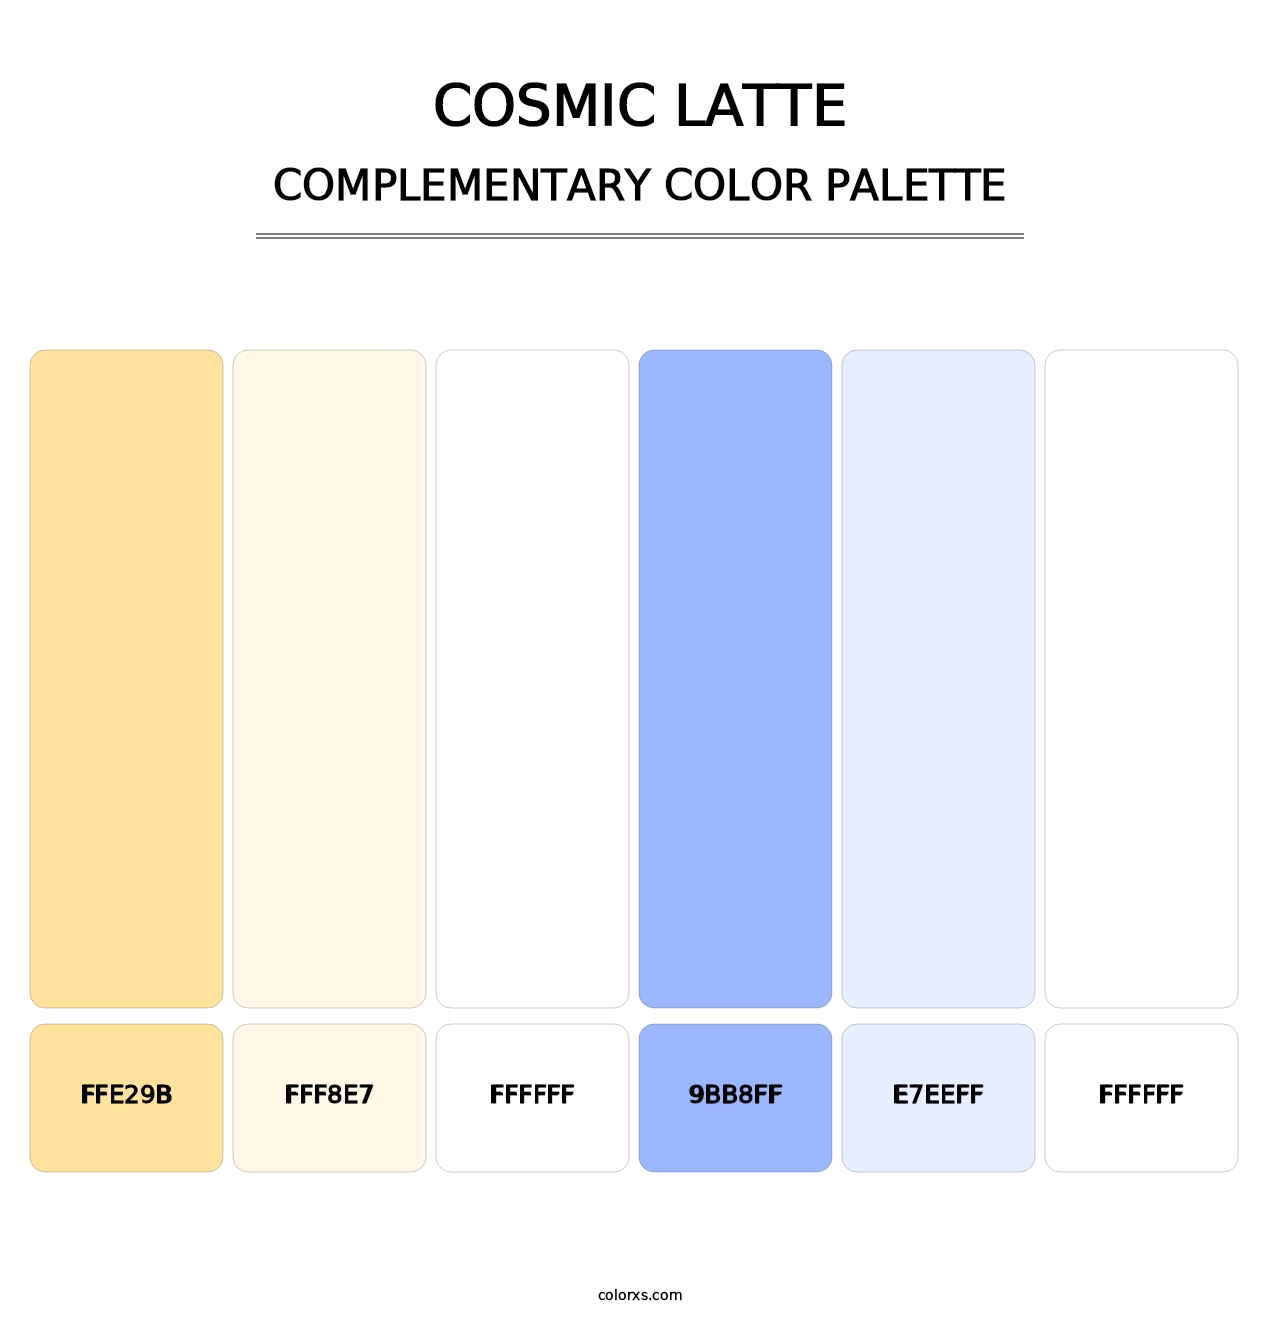 Cosmic Latte - Complementary Color Palette